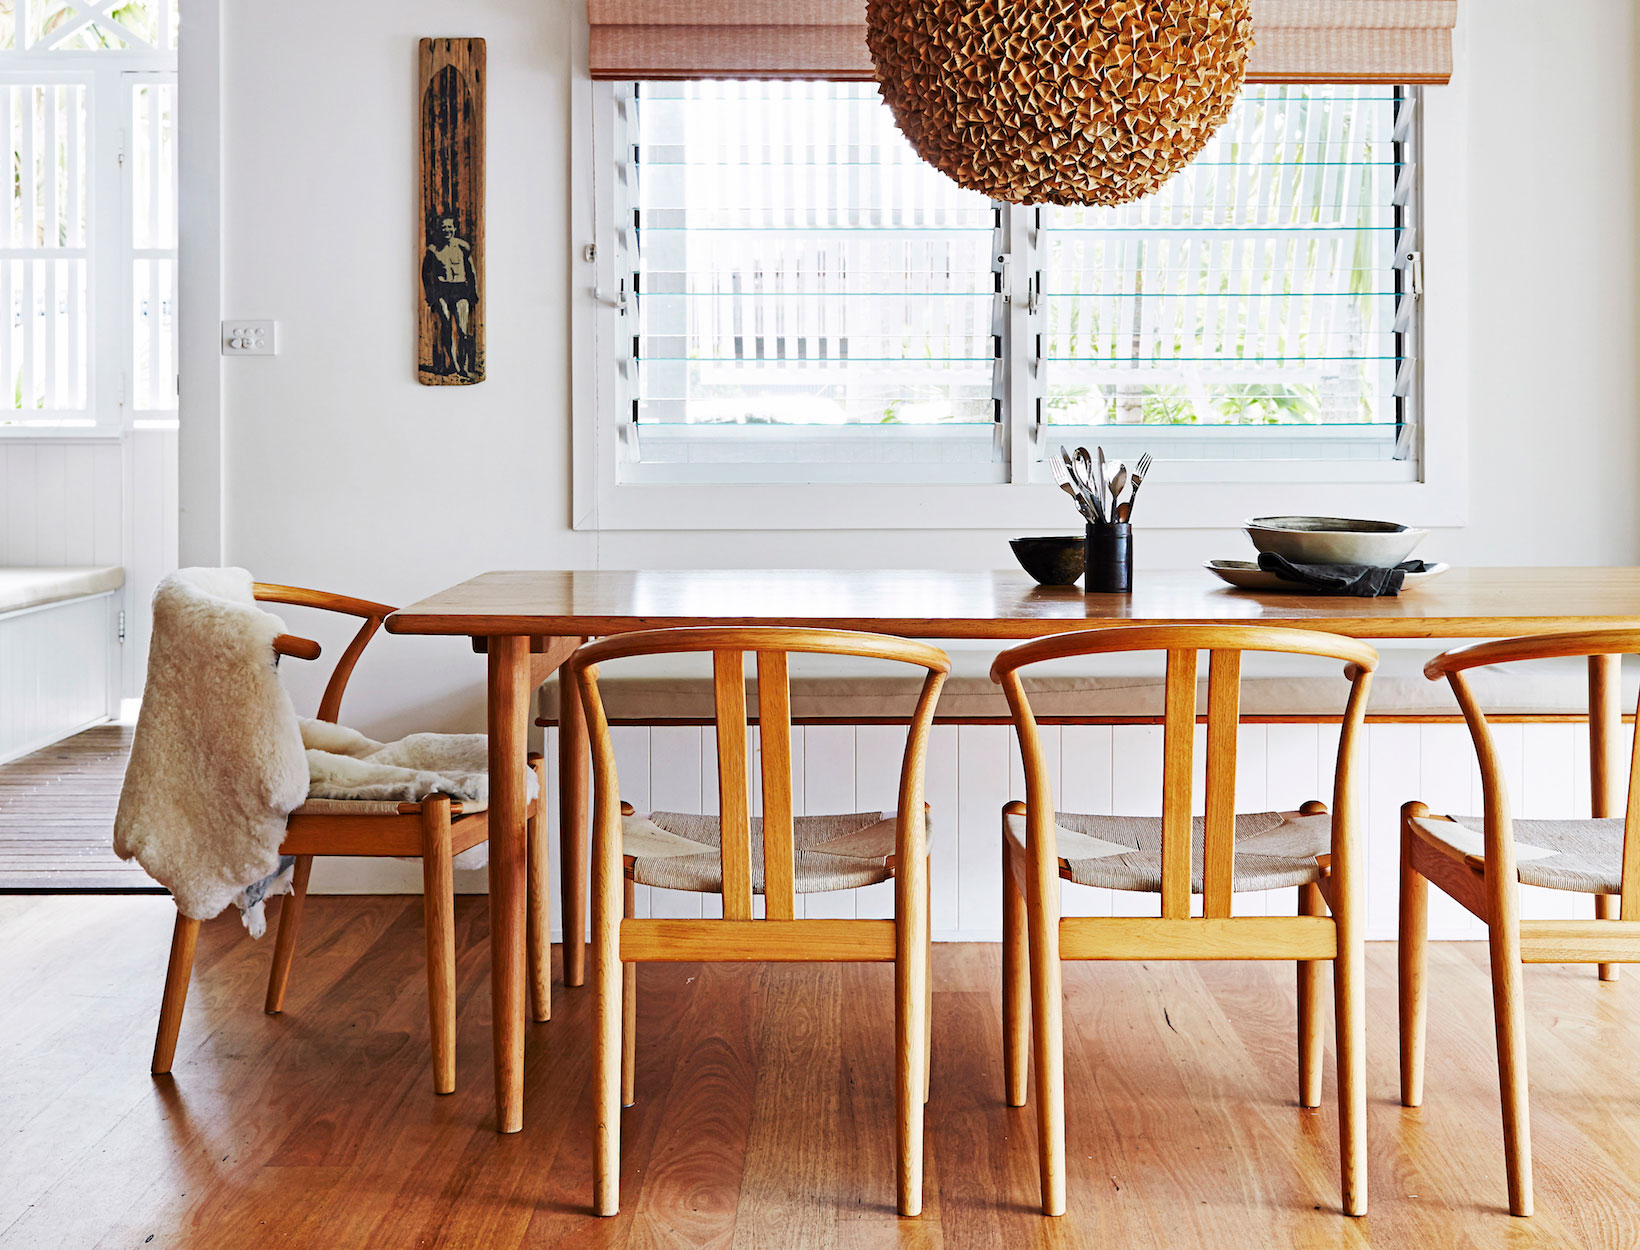 6 Design Professionals on Their Favorite Dining Tables